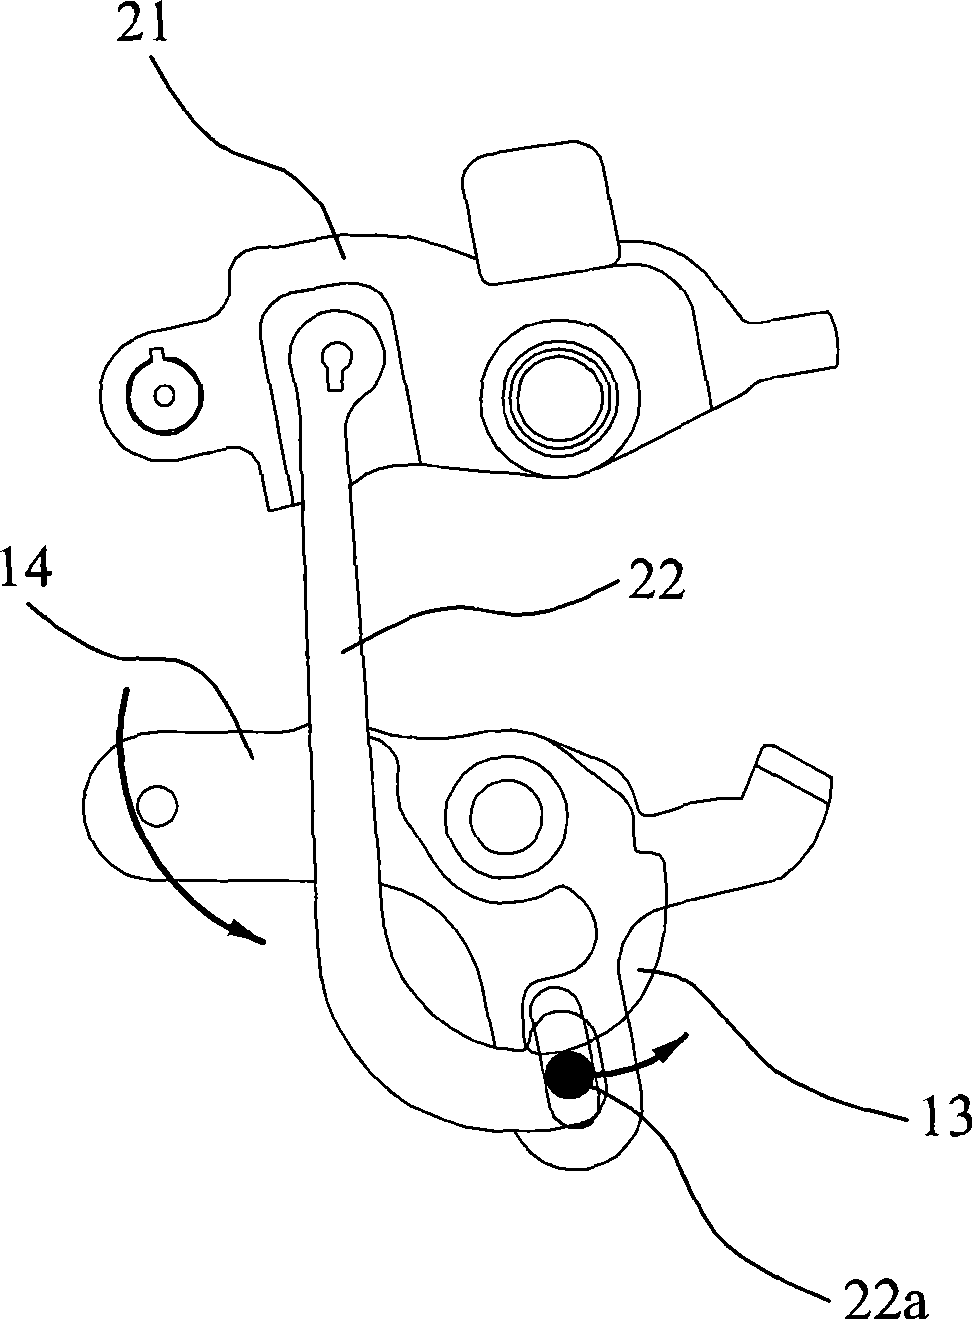 Actuator with simple structure used for door locking device